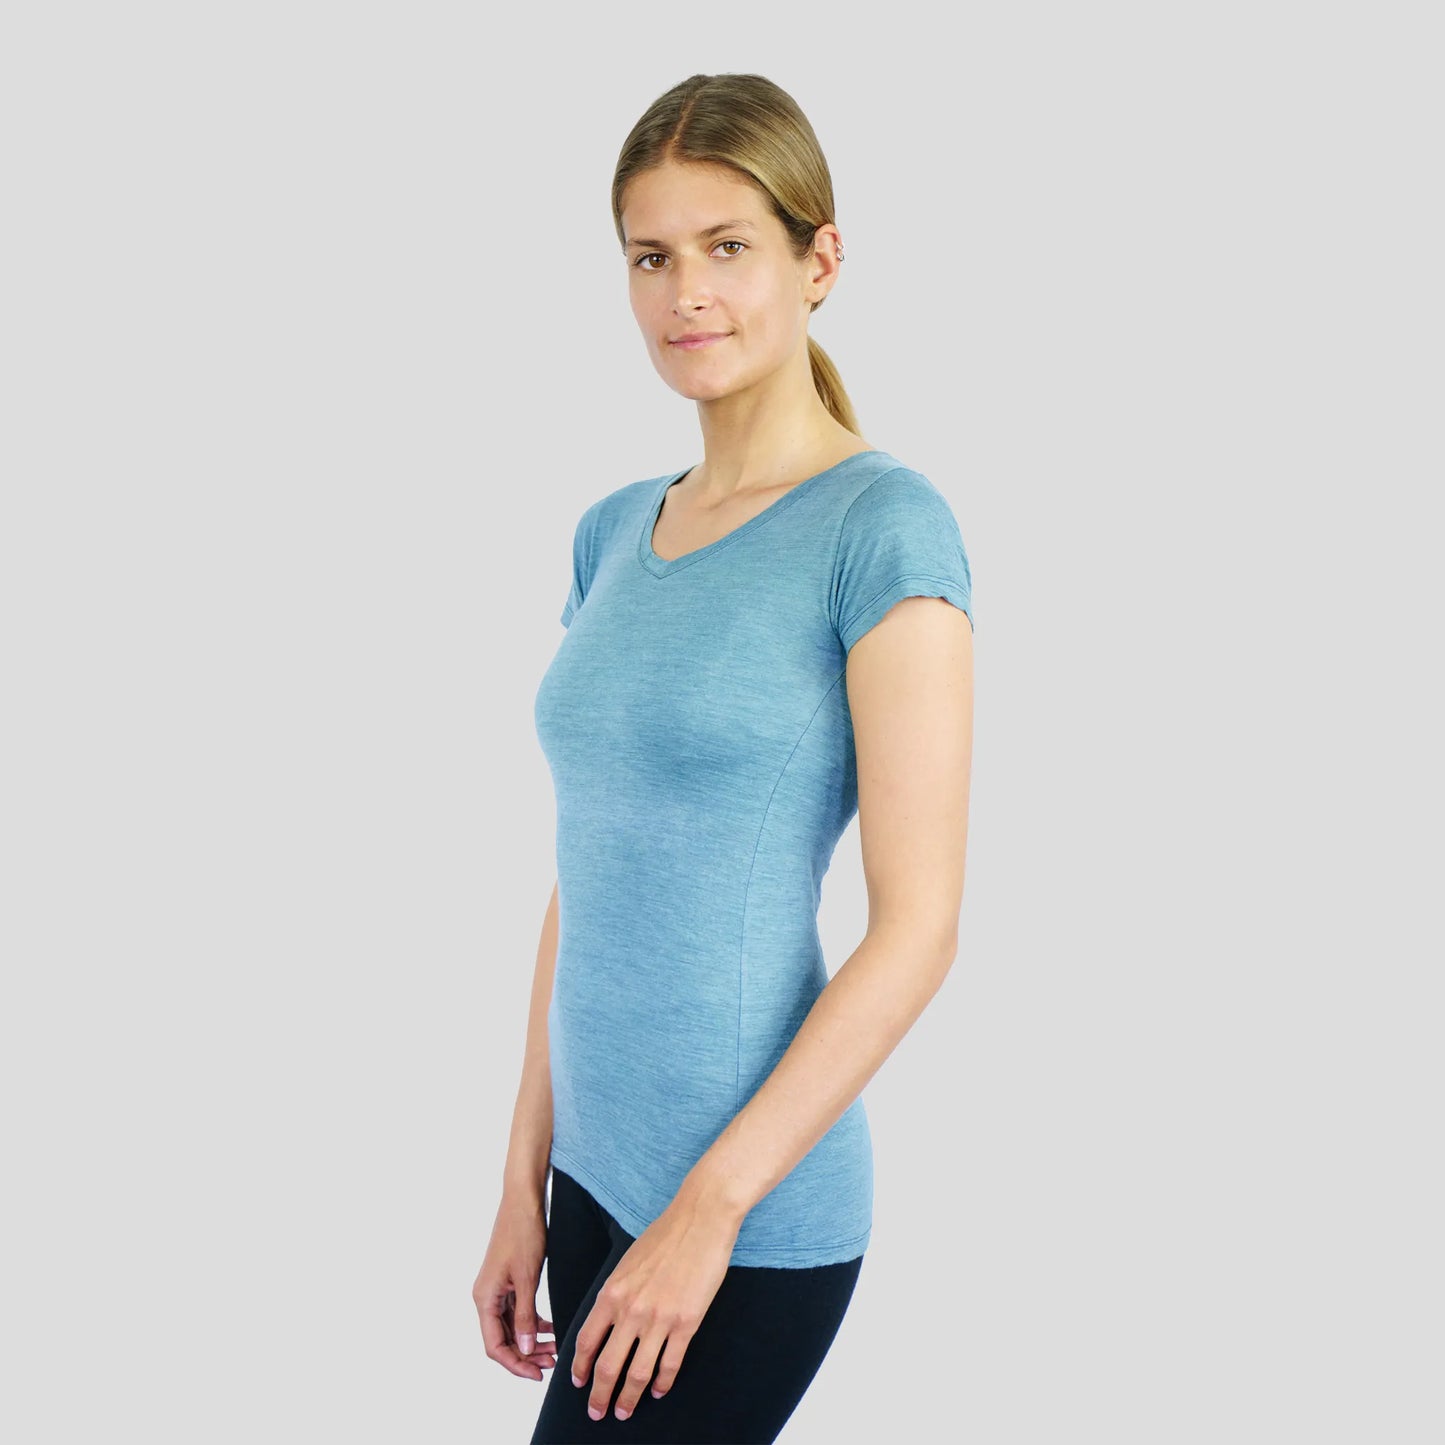 women sustainable alpaca wool v neck shirt ultralight color natural turquoise